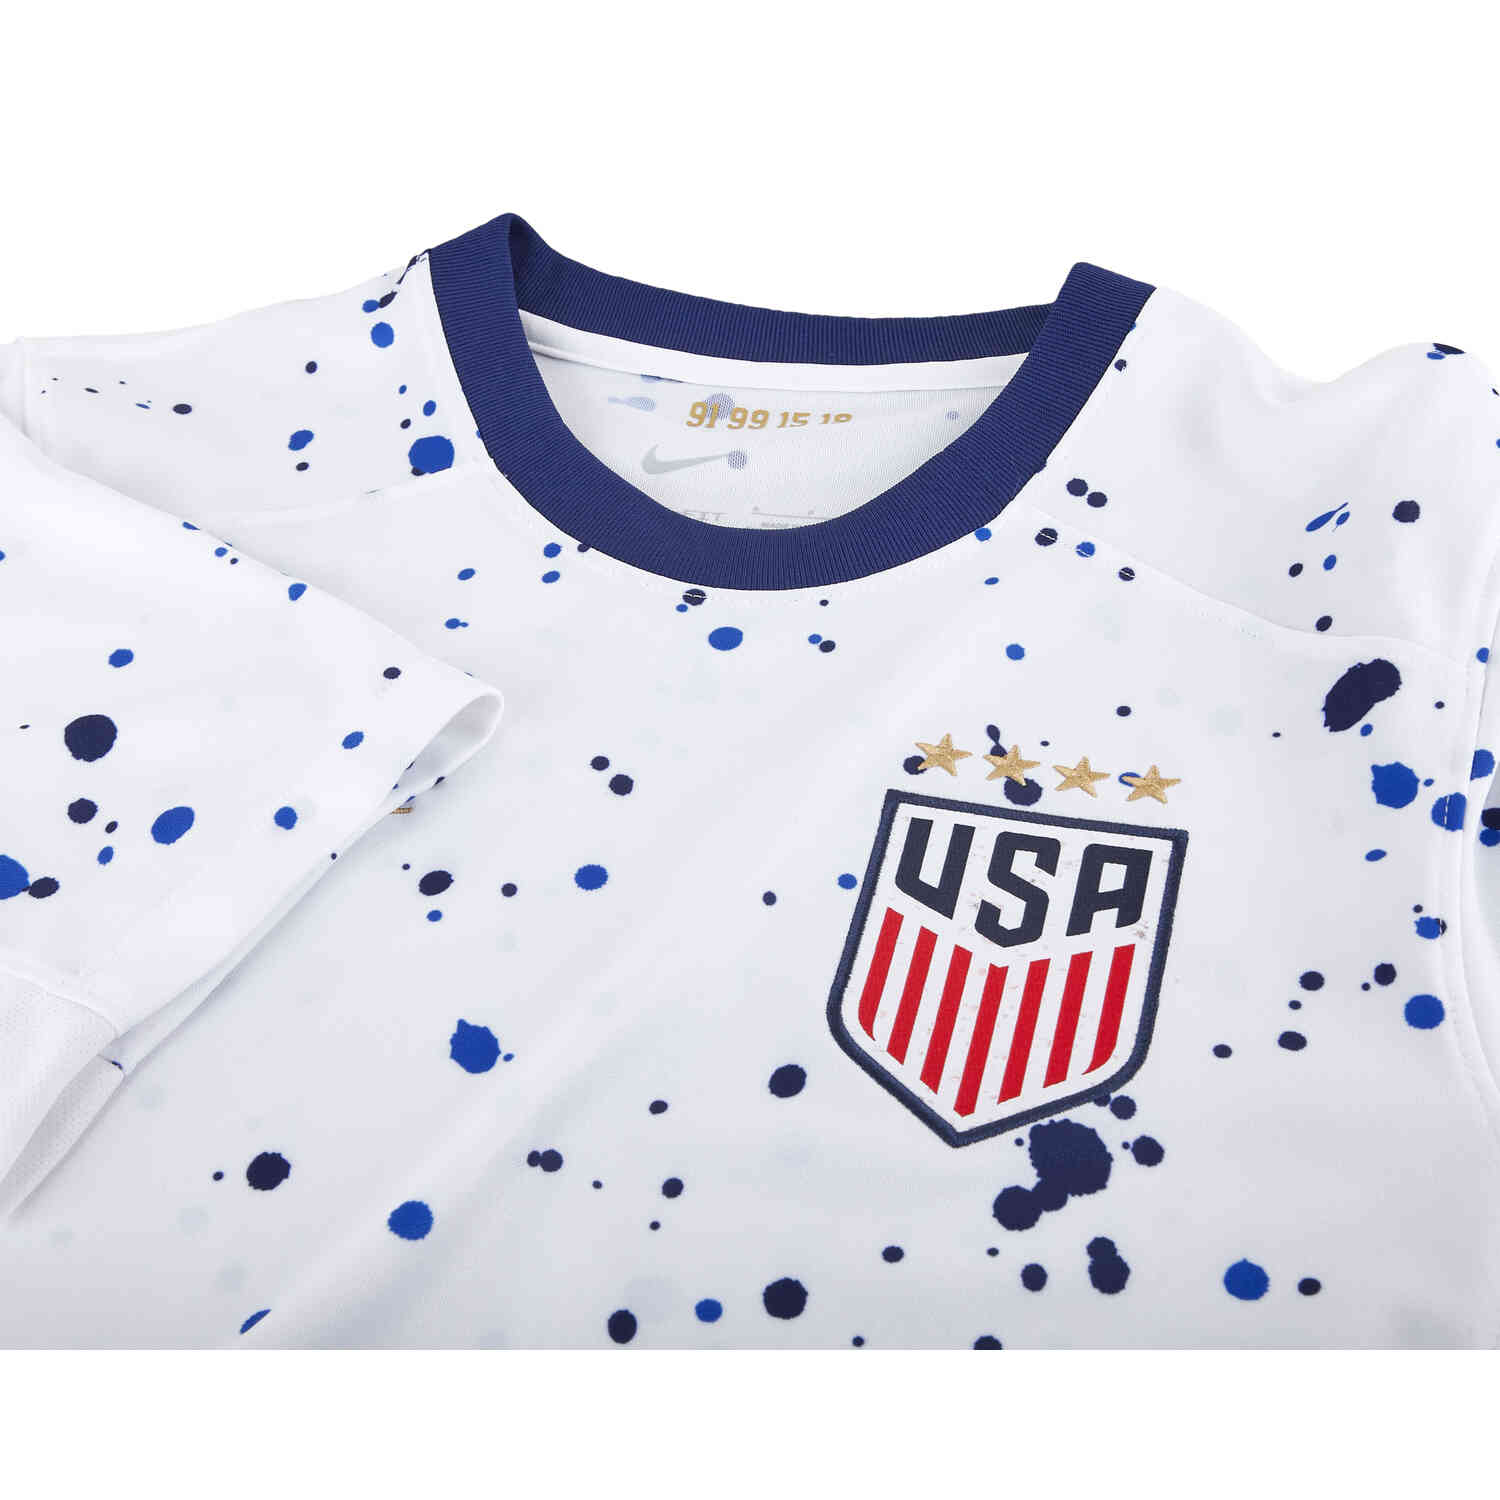 Mallory Swanson USWNT 2023 Youth Home Jersey by Nike - Youth S (US Women's National Team)